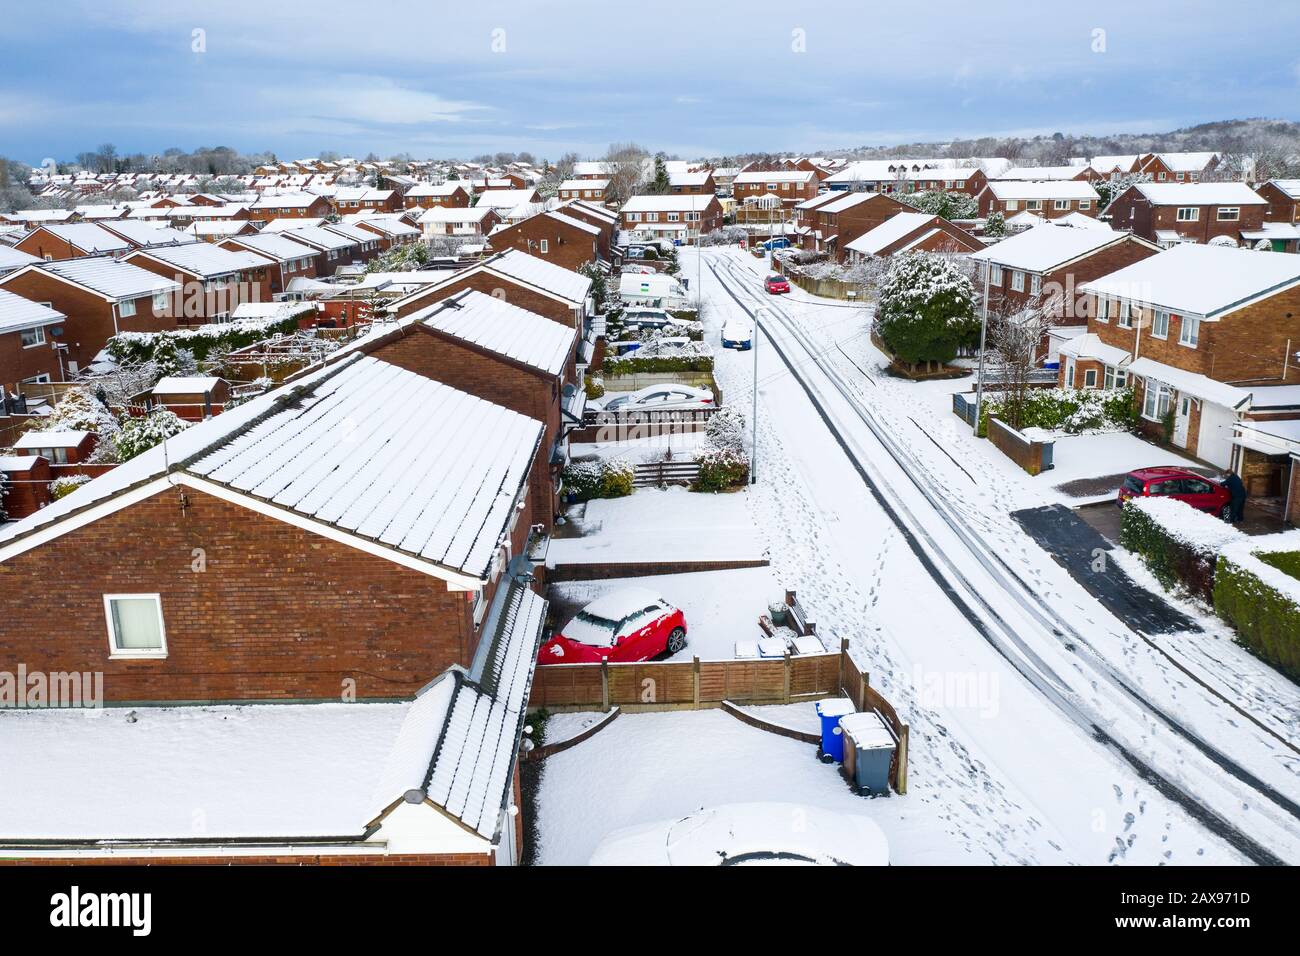 Aerial landscapes of Longton, Stoke on Trent covered in snow after a sudden storm came in. Heavy snowfall and snowy blizzards covering the city Stock Photo